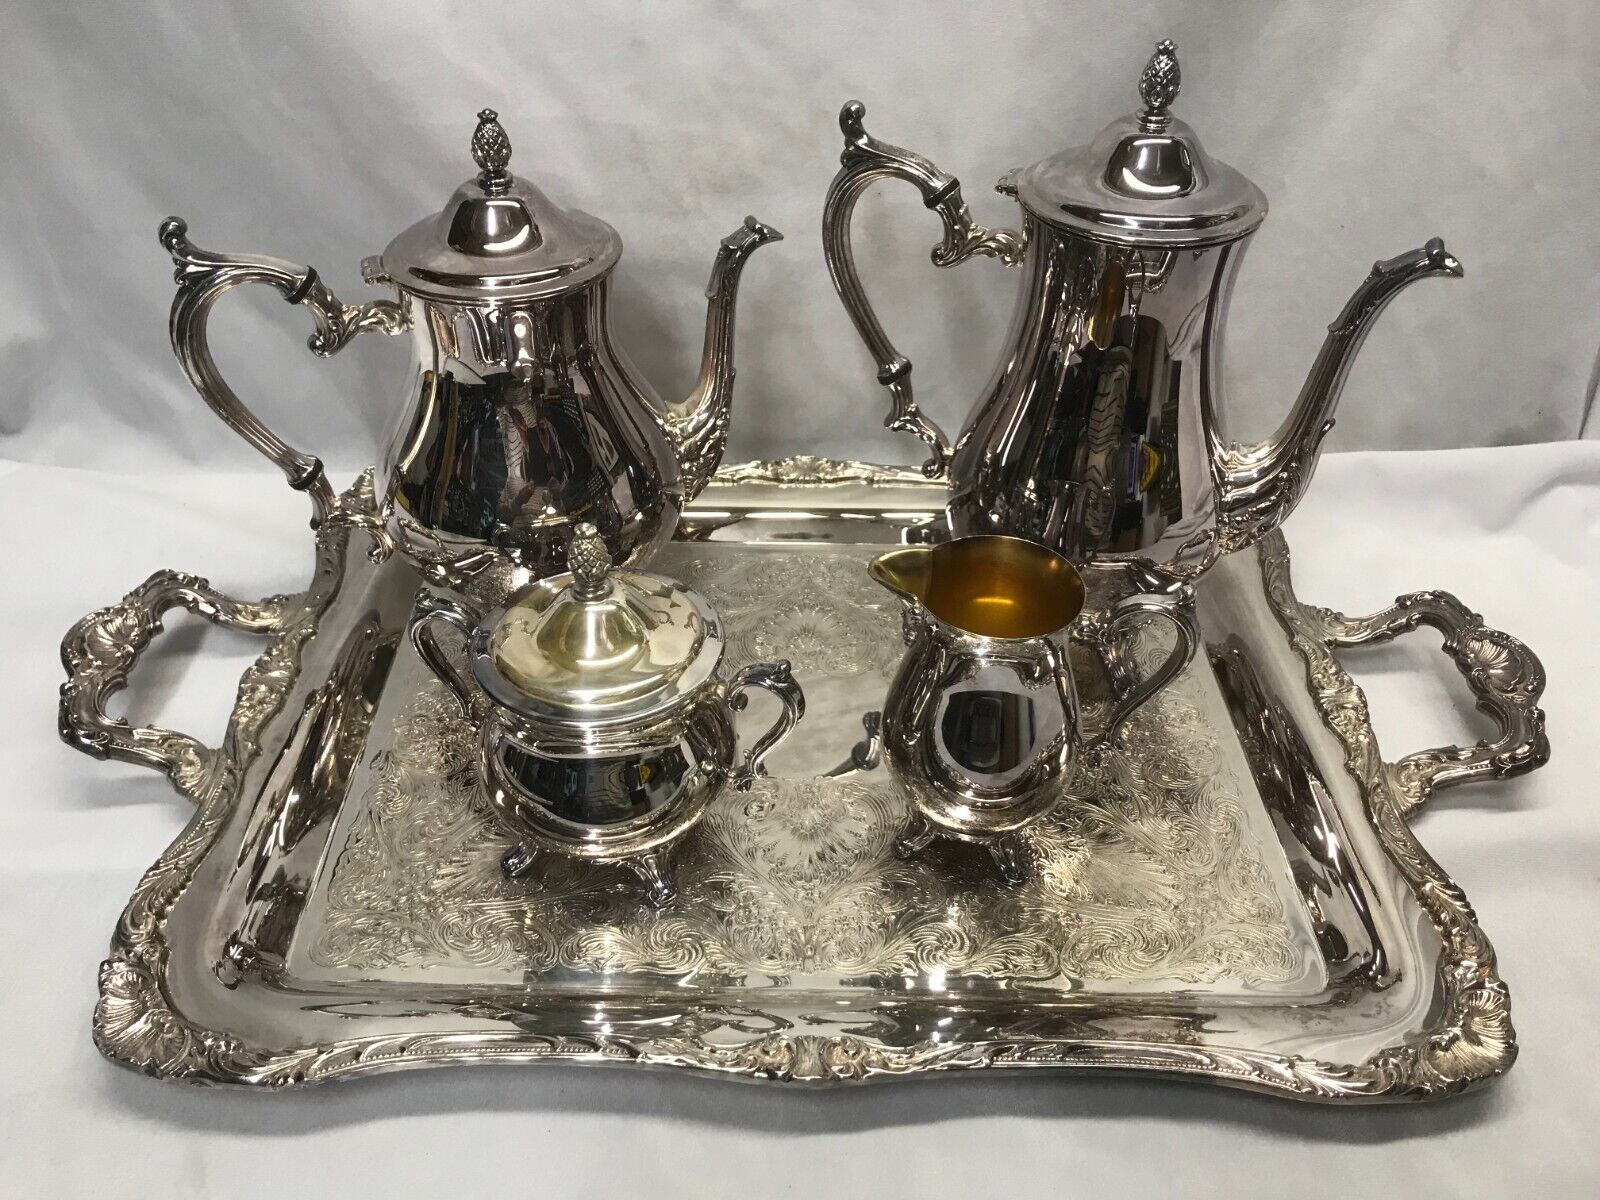 W.M. Rodgers Silver Co. Silver Plated Tea Set